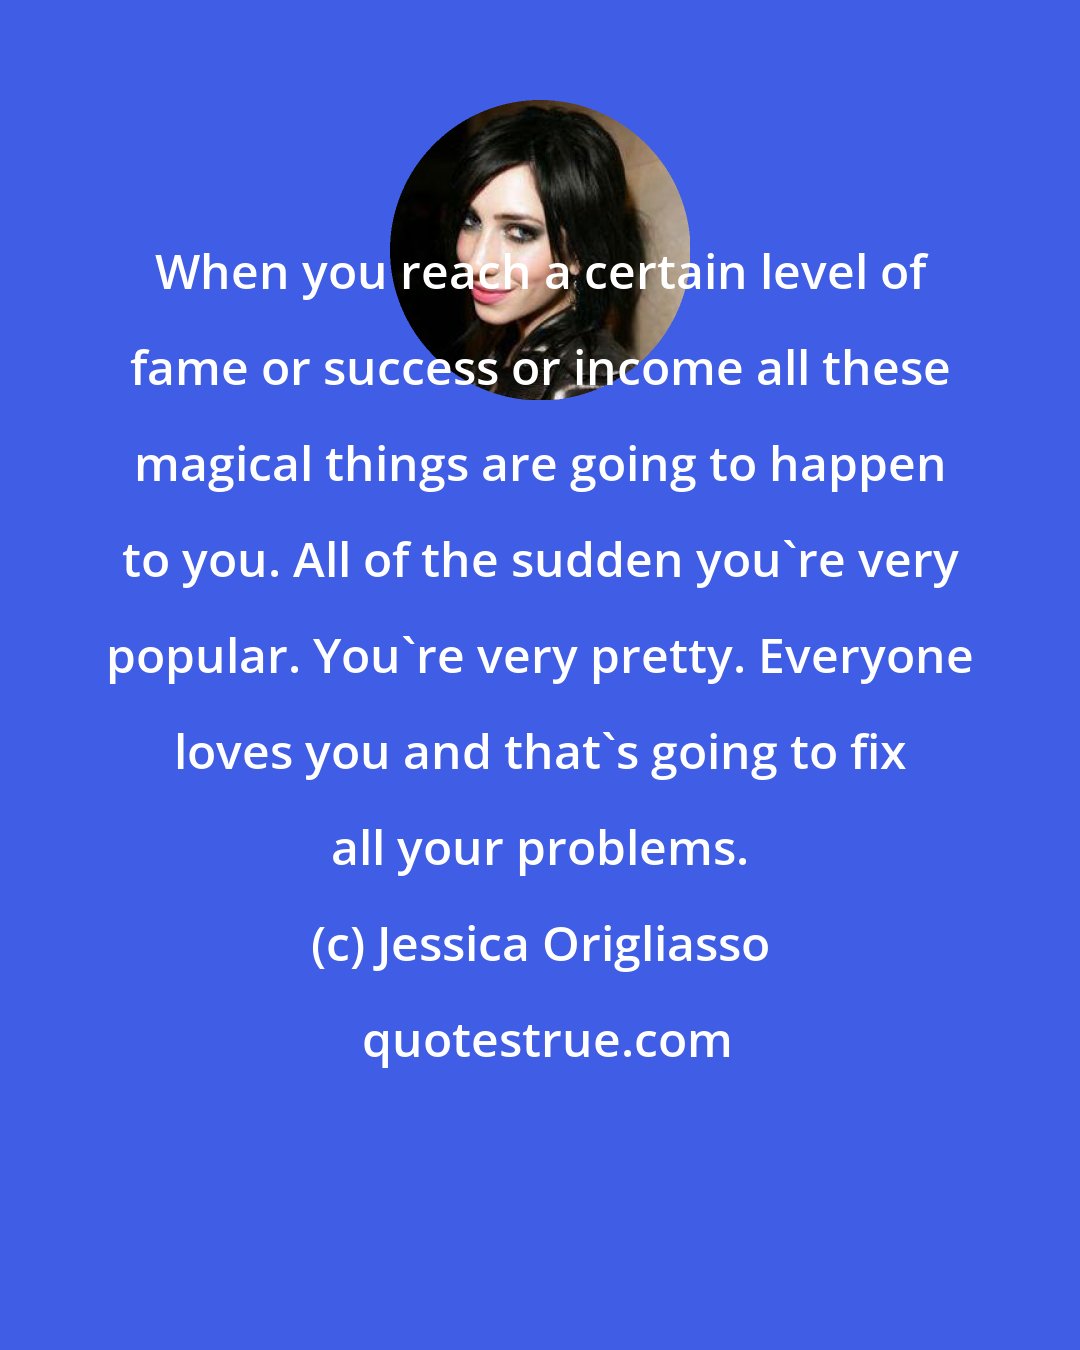 Jessica Origliasso: When you reach a certain level of fame or success or income all these magical things are going to happen to you. All of the sudden you're very popular. You're very pretty. Everyone loves you and that's going to fix all your problems.